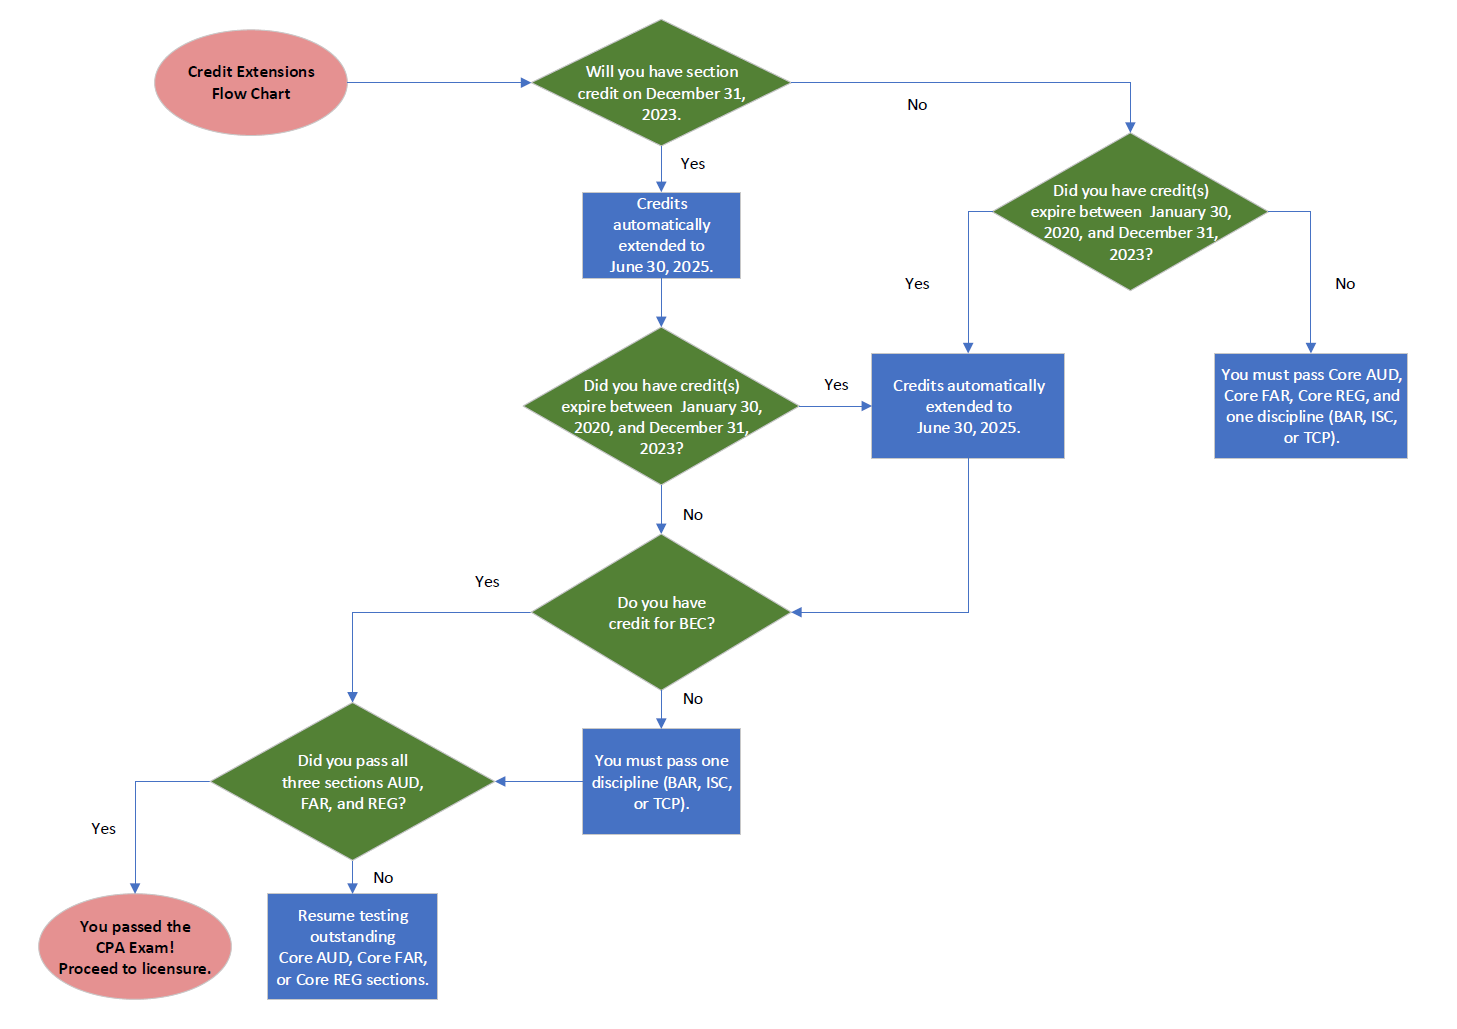 CPA Exam Credit Extensions Flow Chart